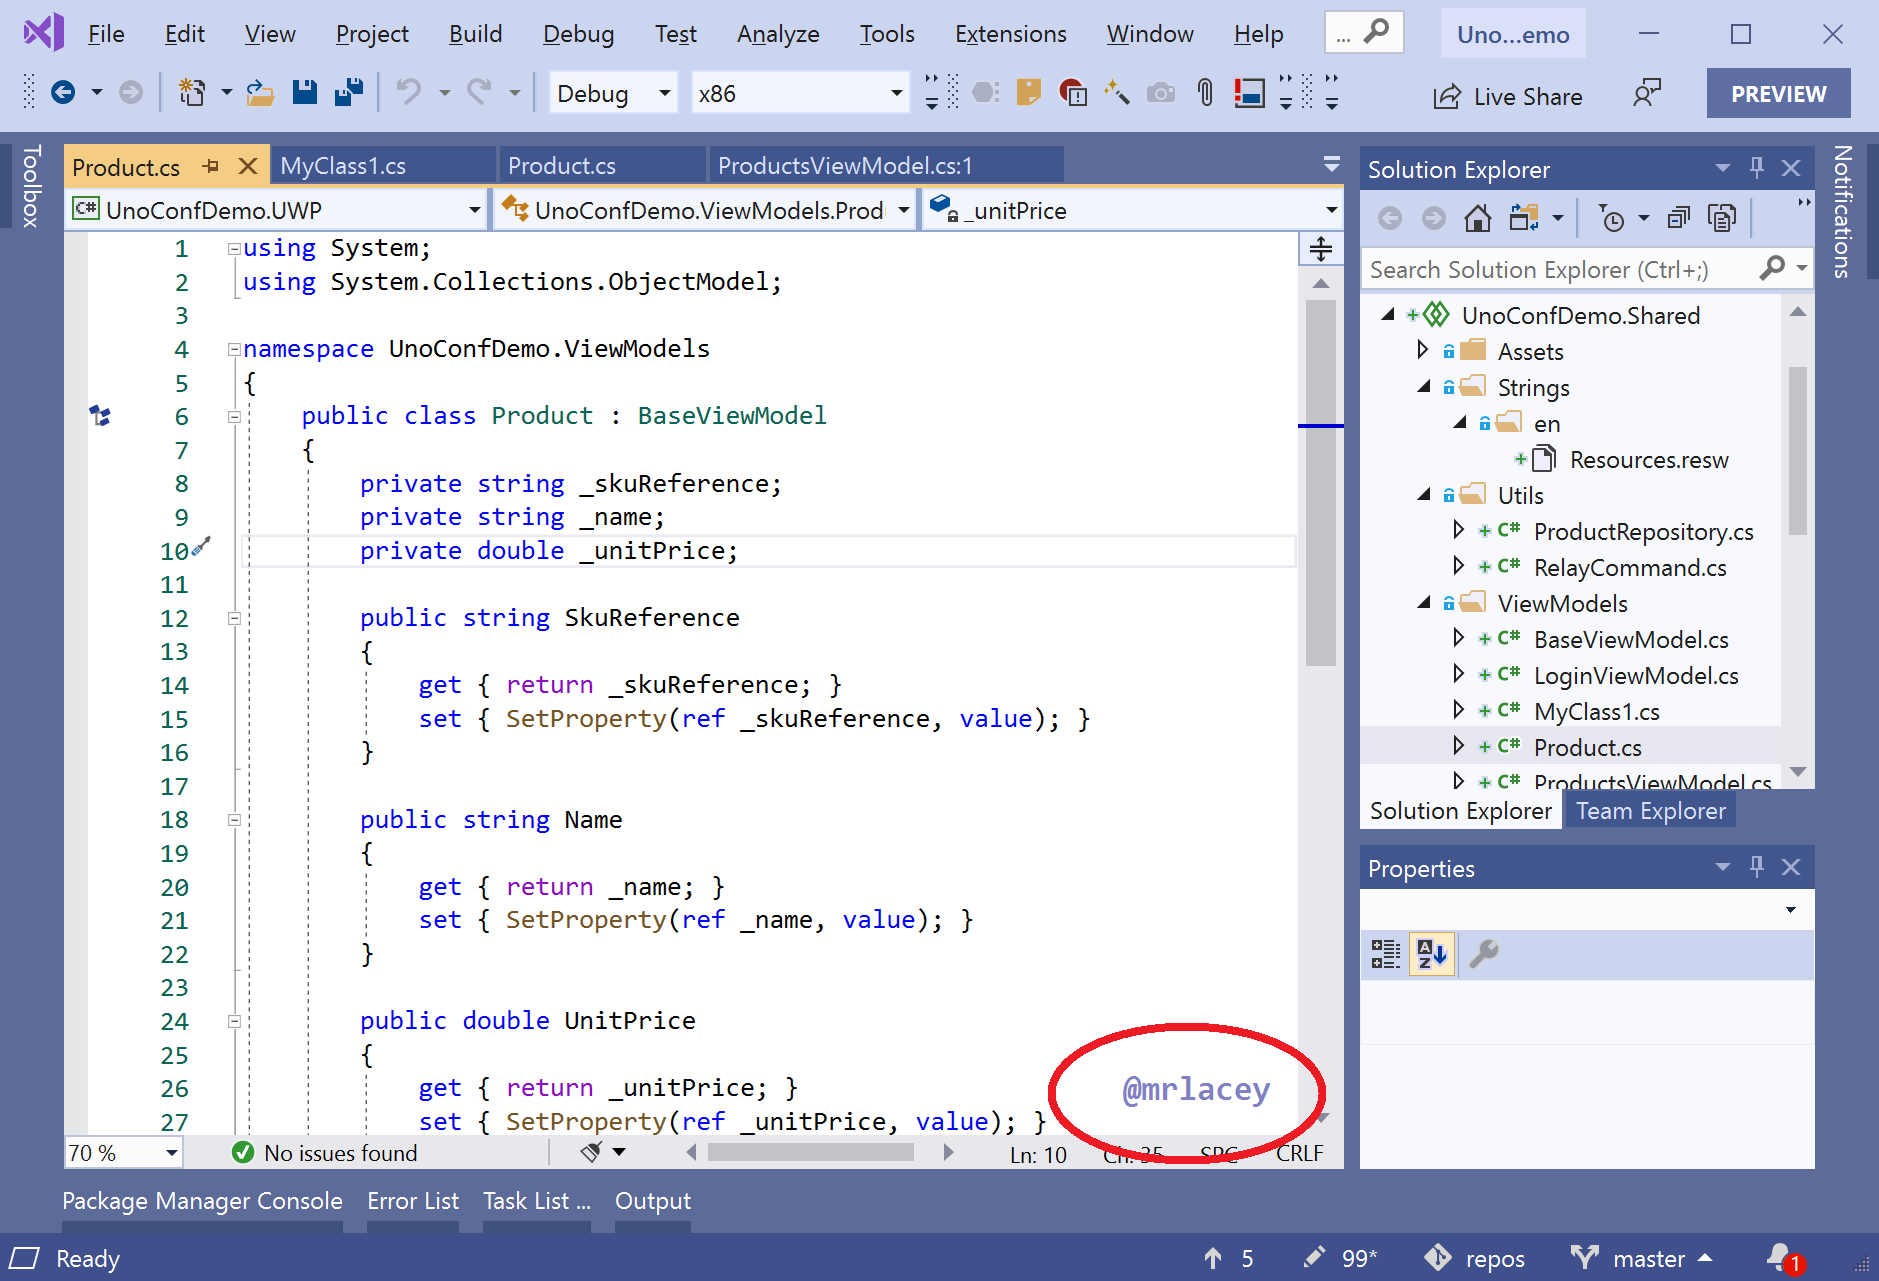 The Visual Studio editor showing a watermark